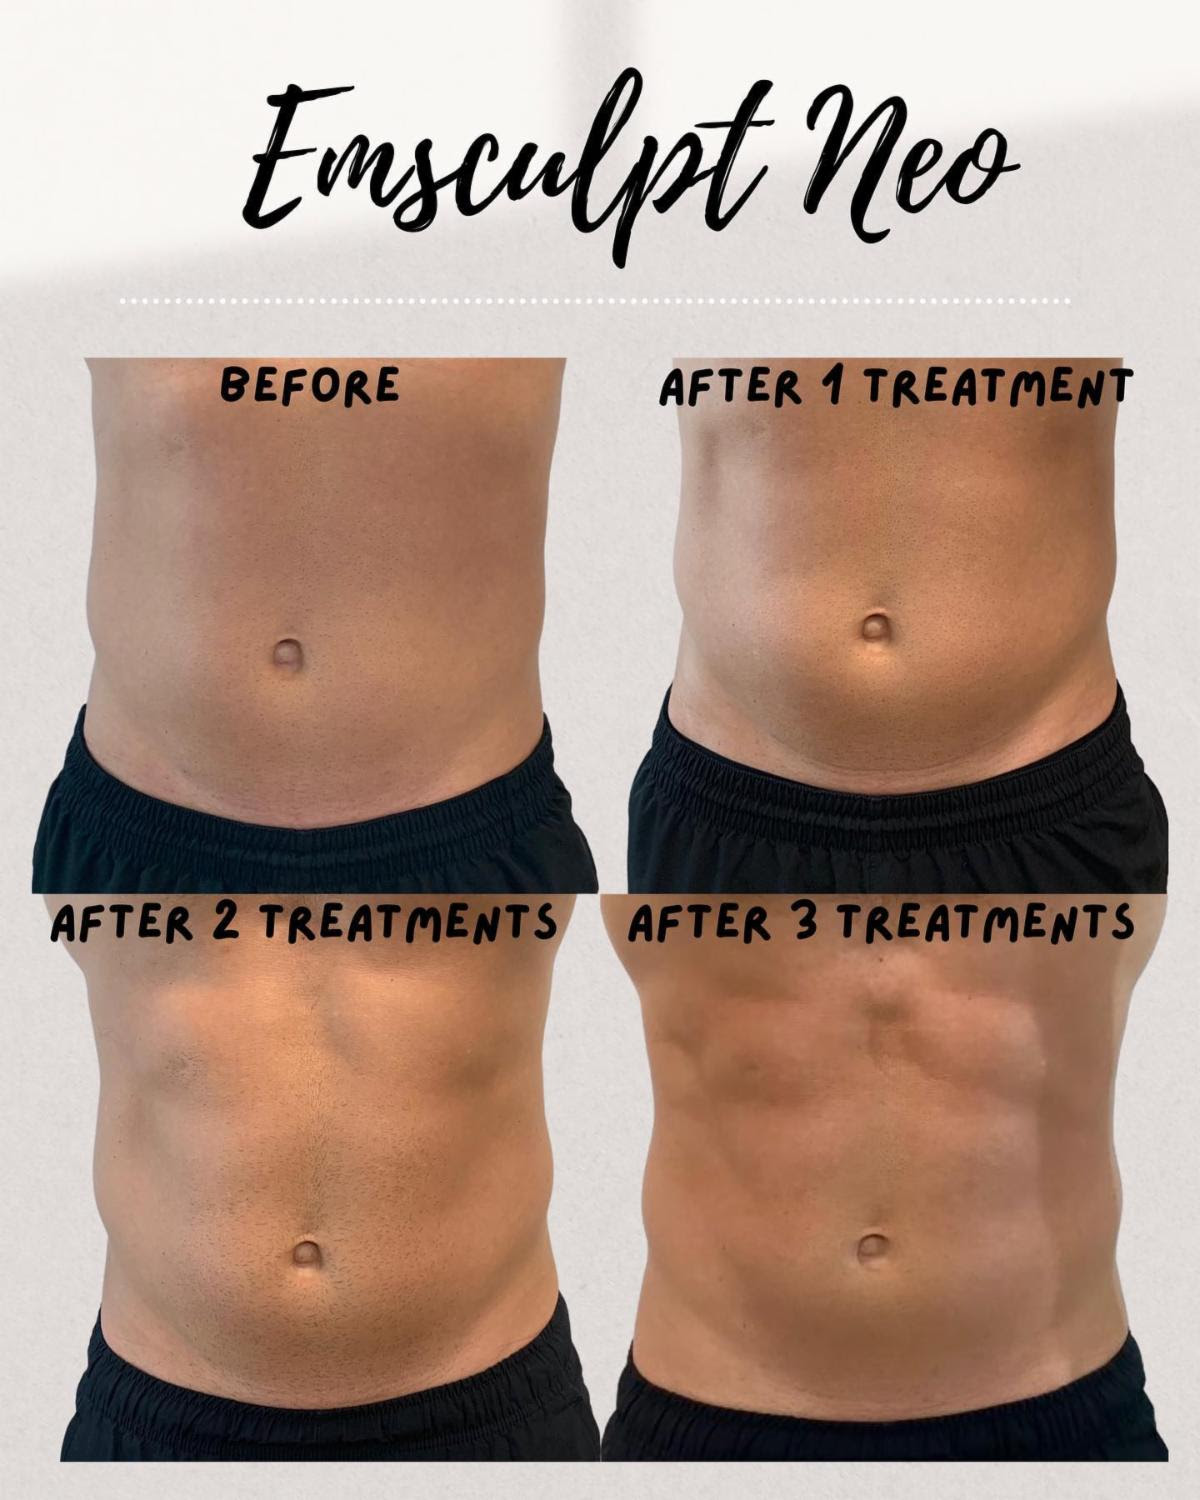 22% OFF your package of Emsculpt Neo-2